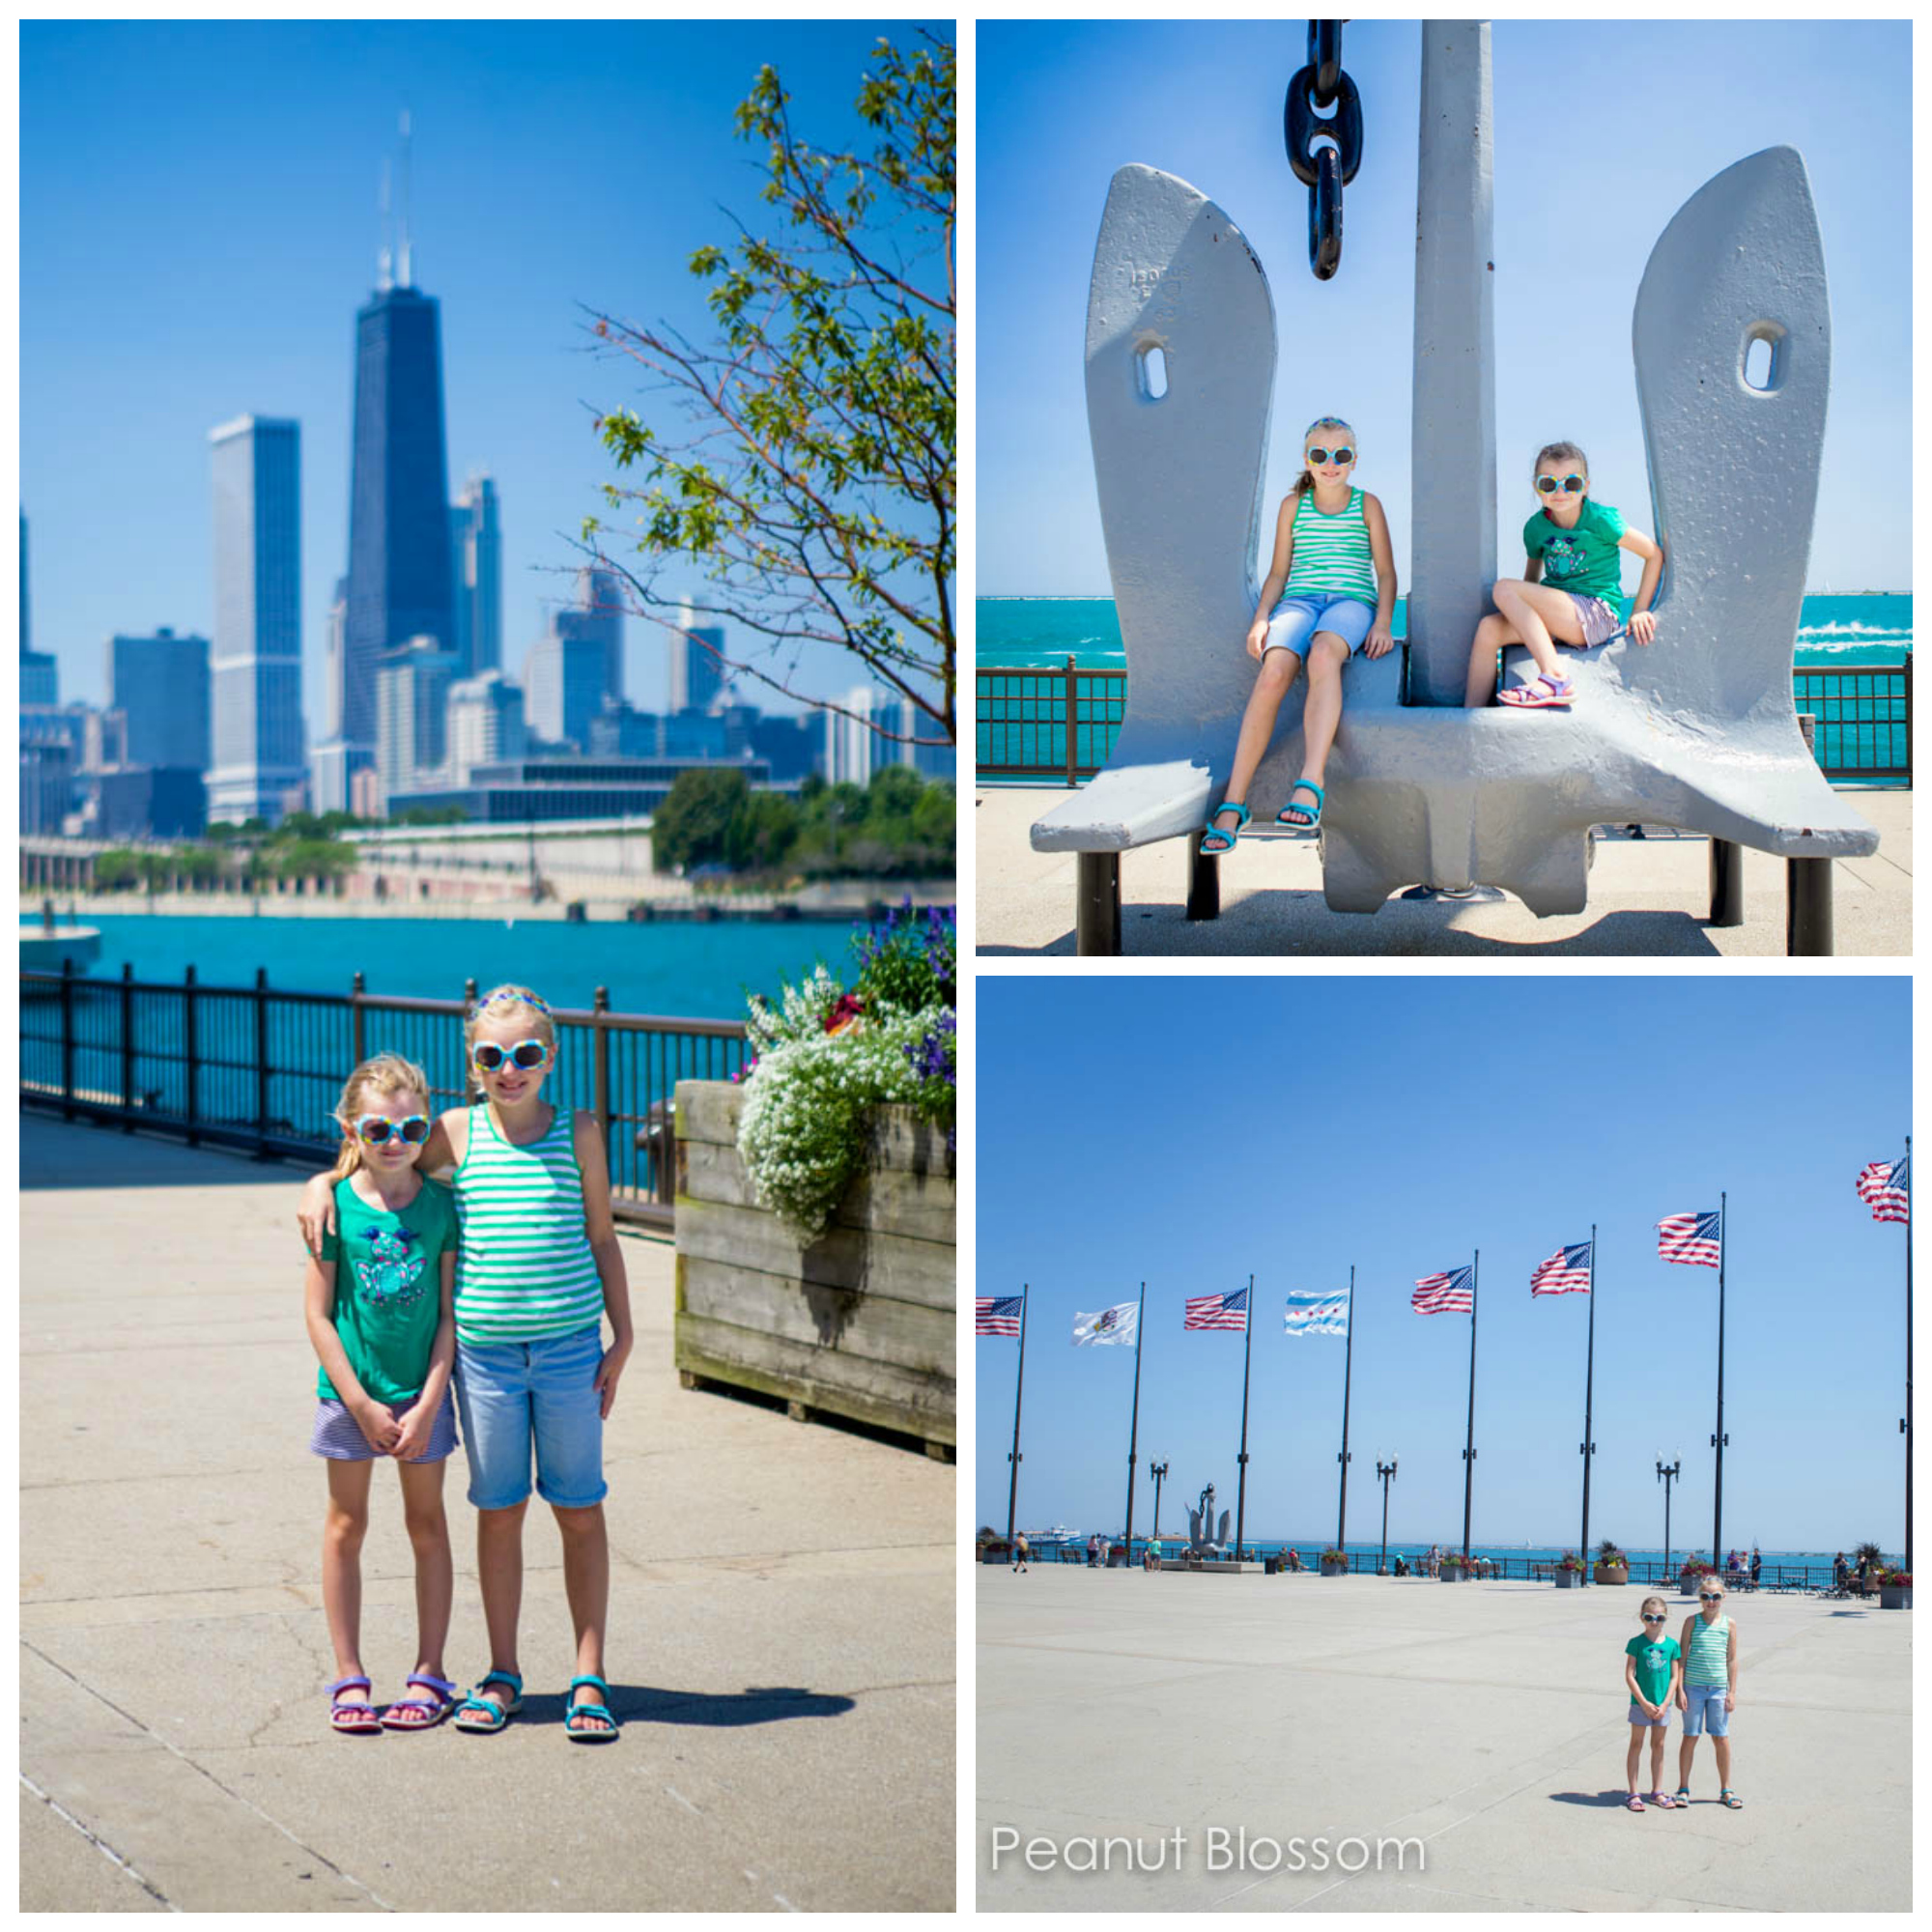 Save money on family vacations in Chicago